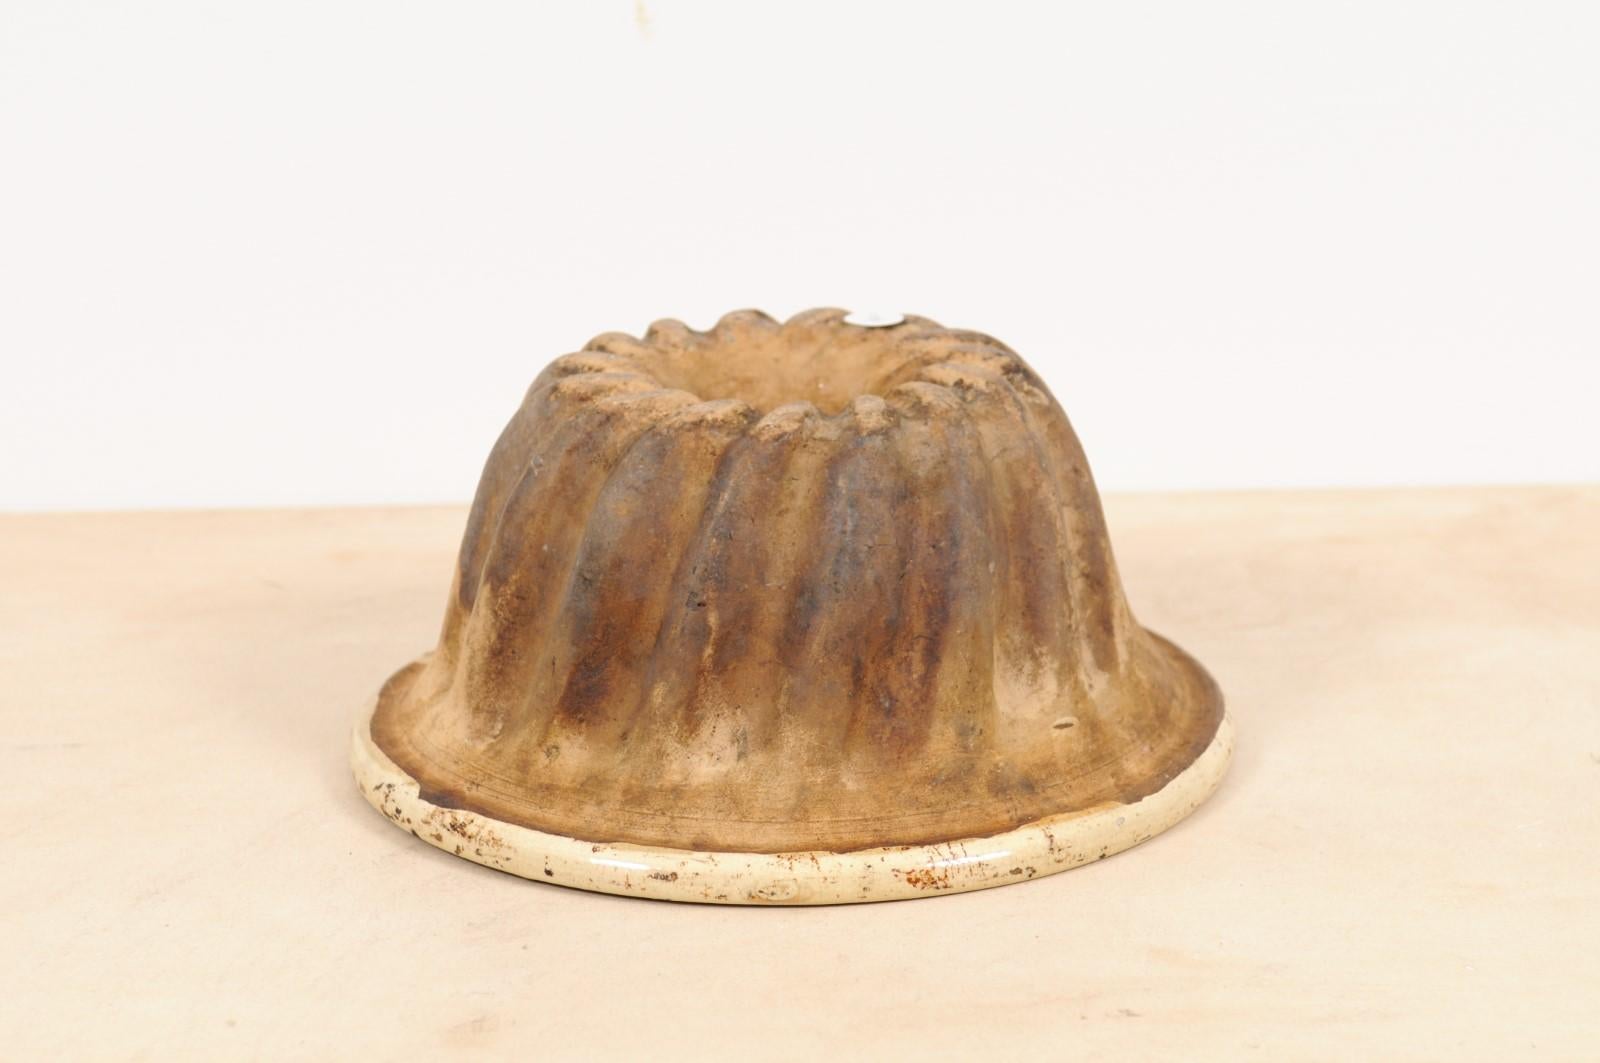 French 19th Century Terracotta Kouglof Cake Mold with Beige and Brown Tones For Sale 4